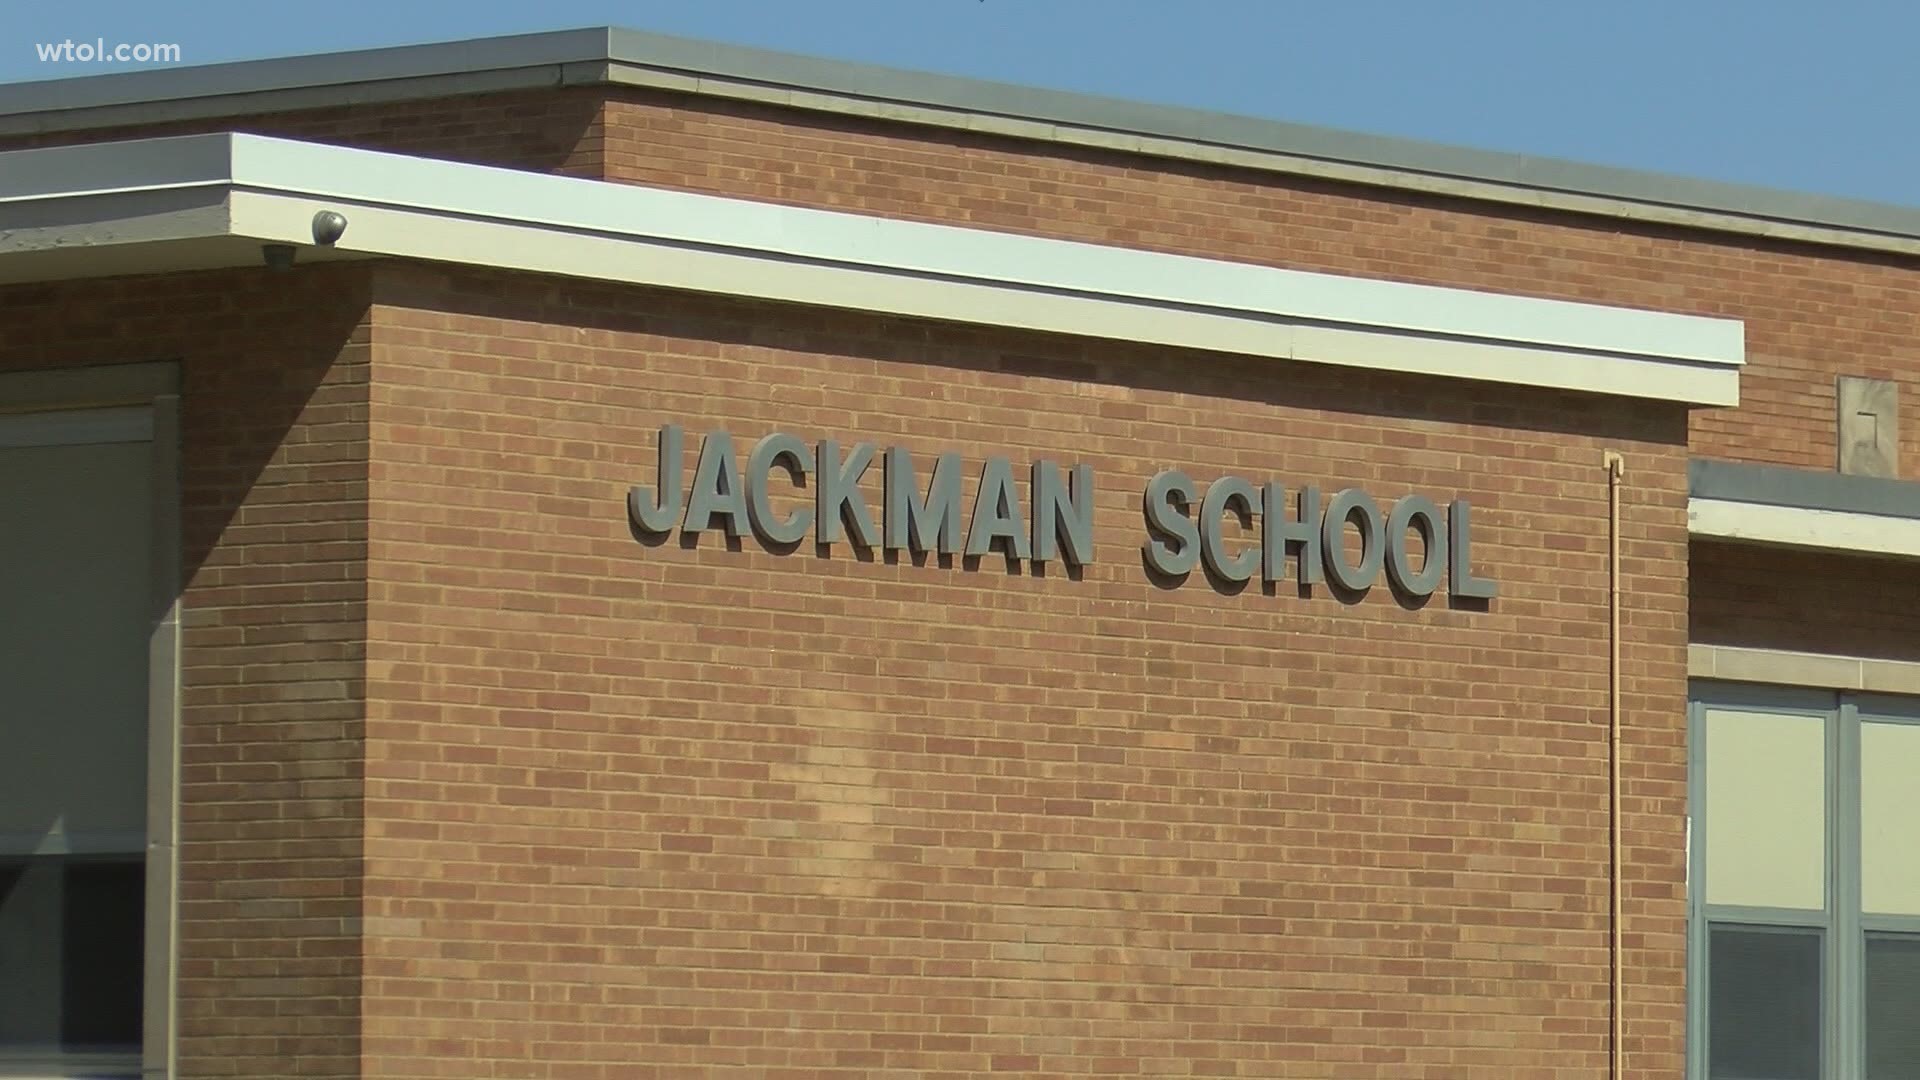 What started as just a few weeks of virtual learning turned into the remainder of the school year and more. One superintendent says it hasn't been the same since.